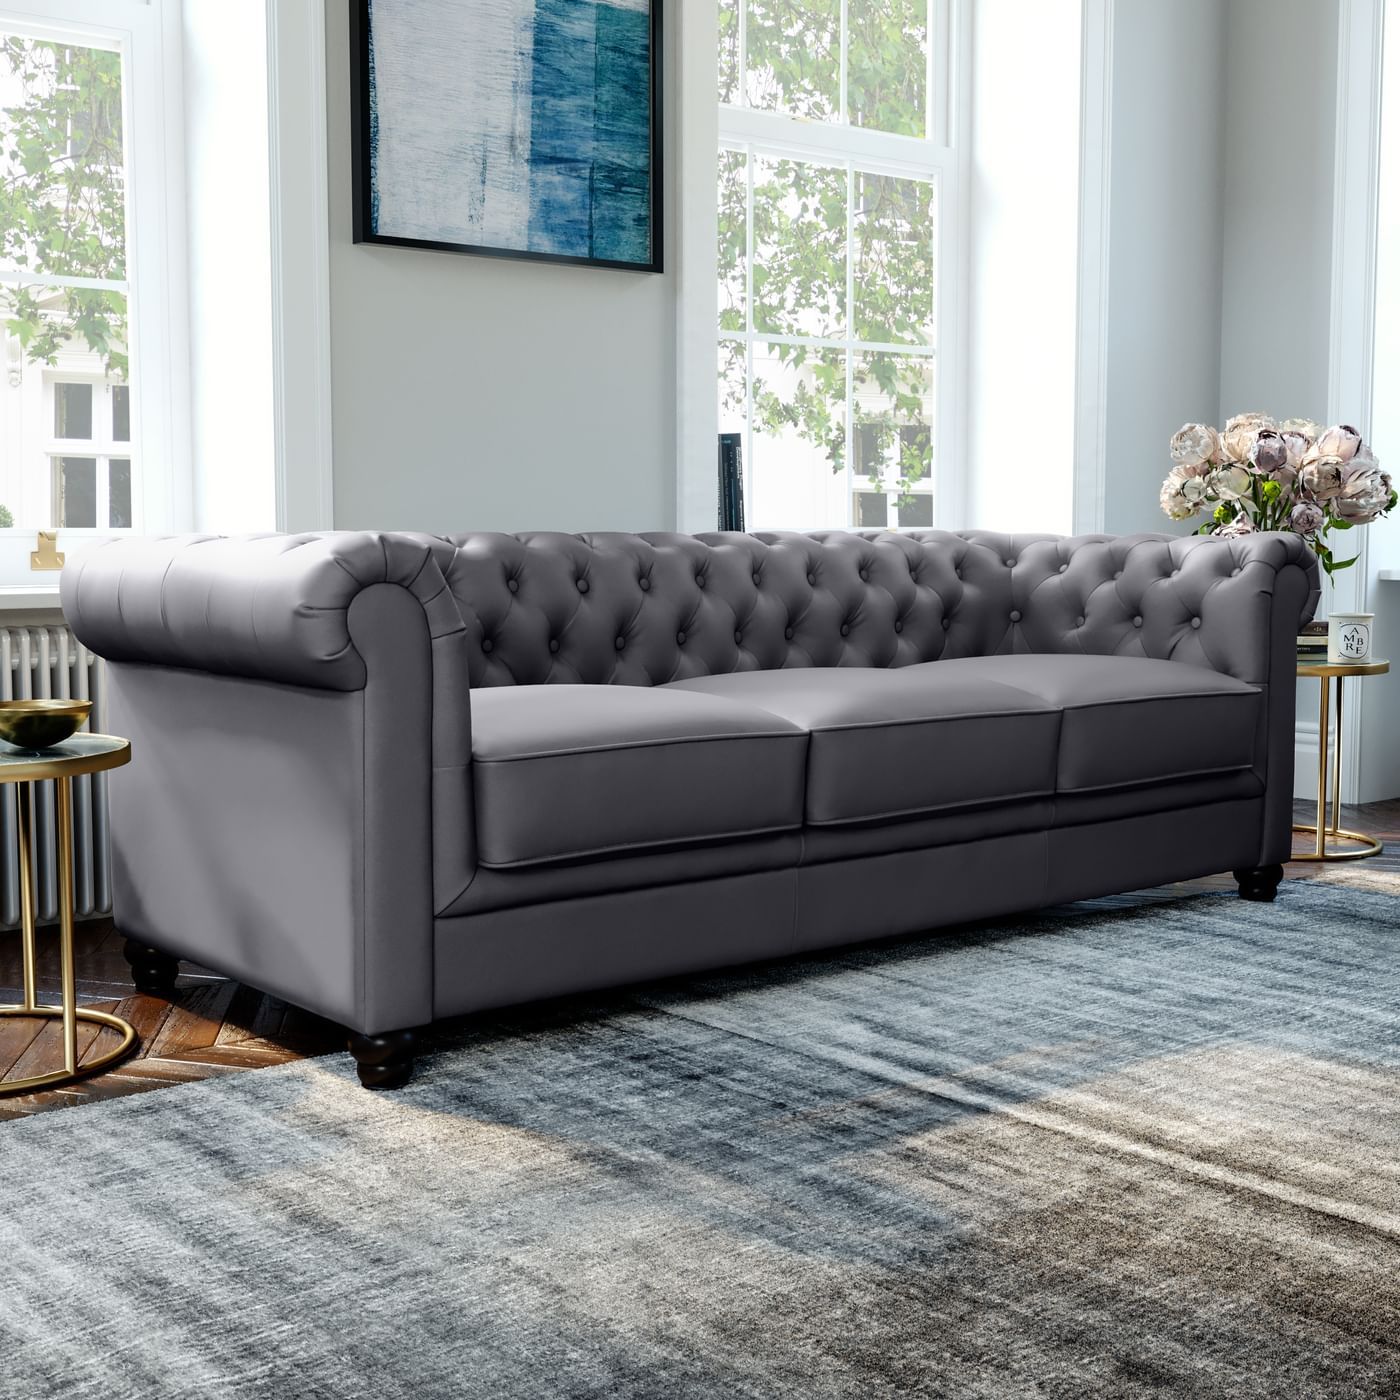 Hampton Grey Leather 3 Seater Chesterfield Sofa | Furniture Choice With Regard To Traditional 3 Seater Sofas (Gallery 11 of 20)